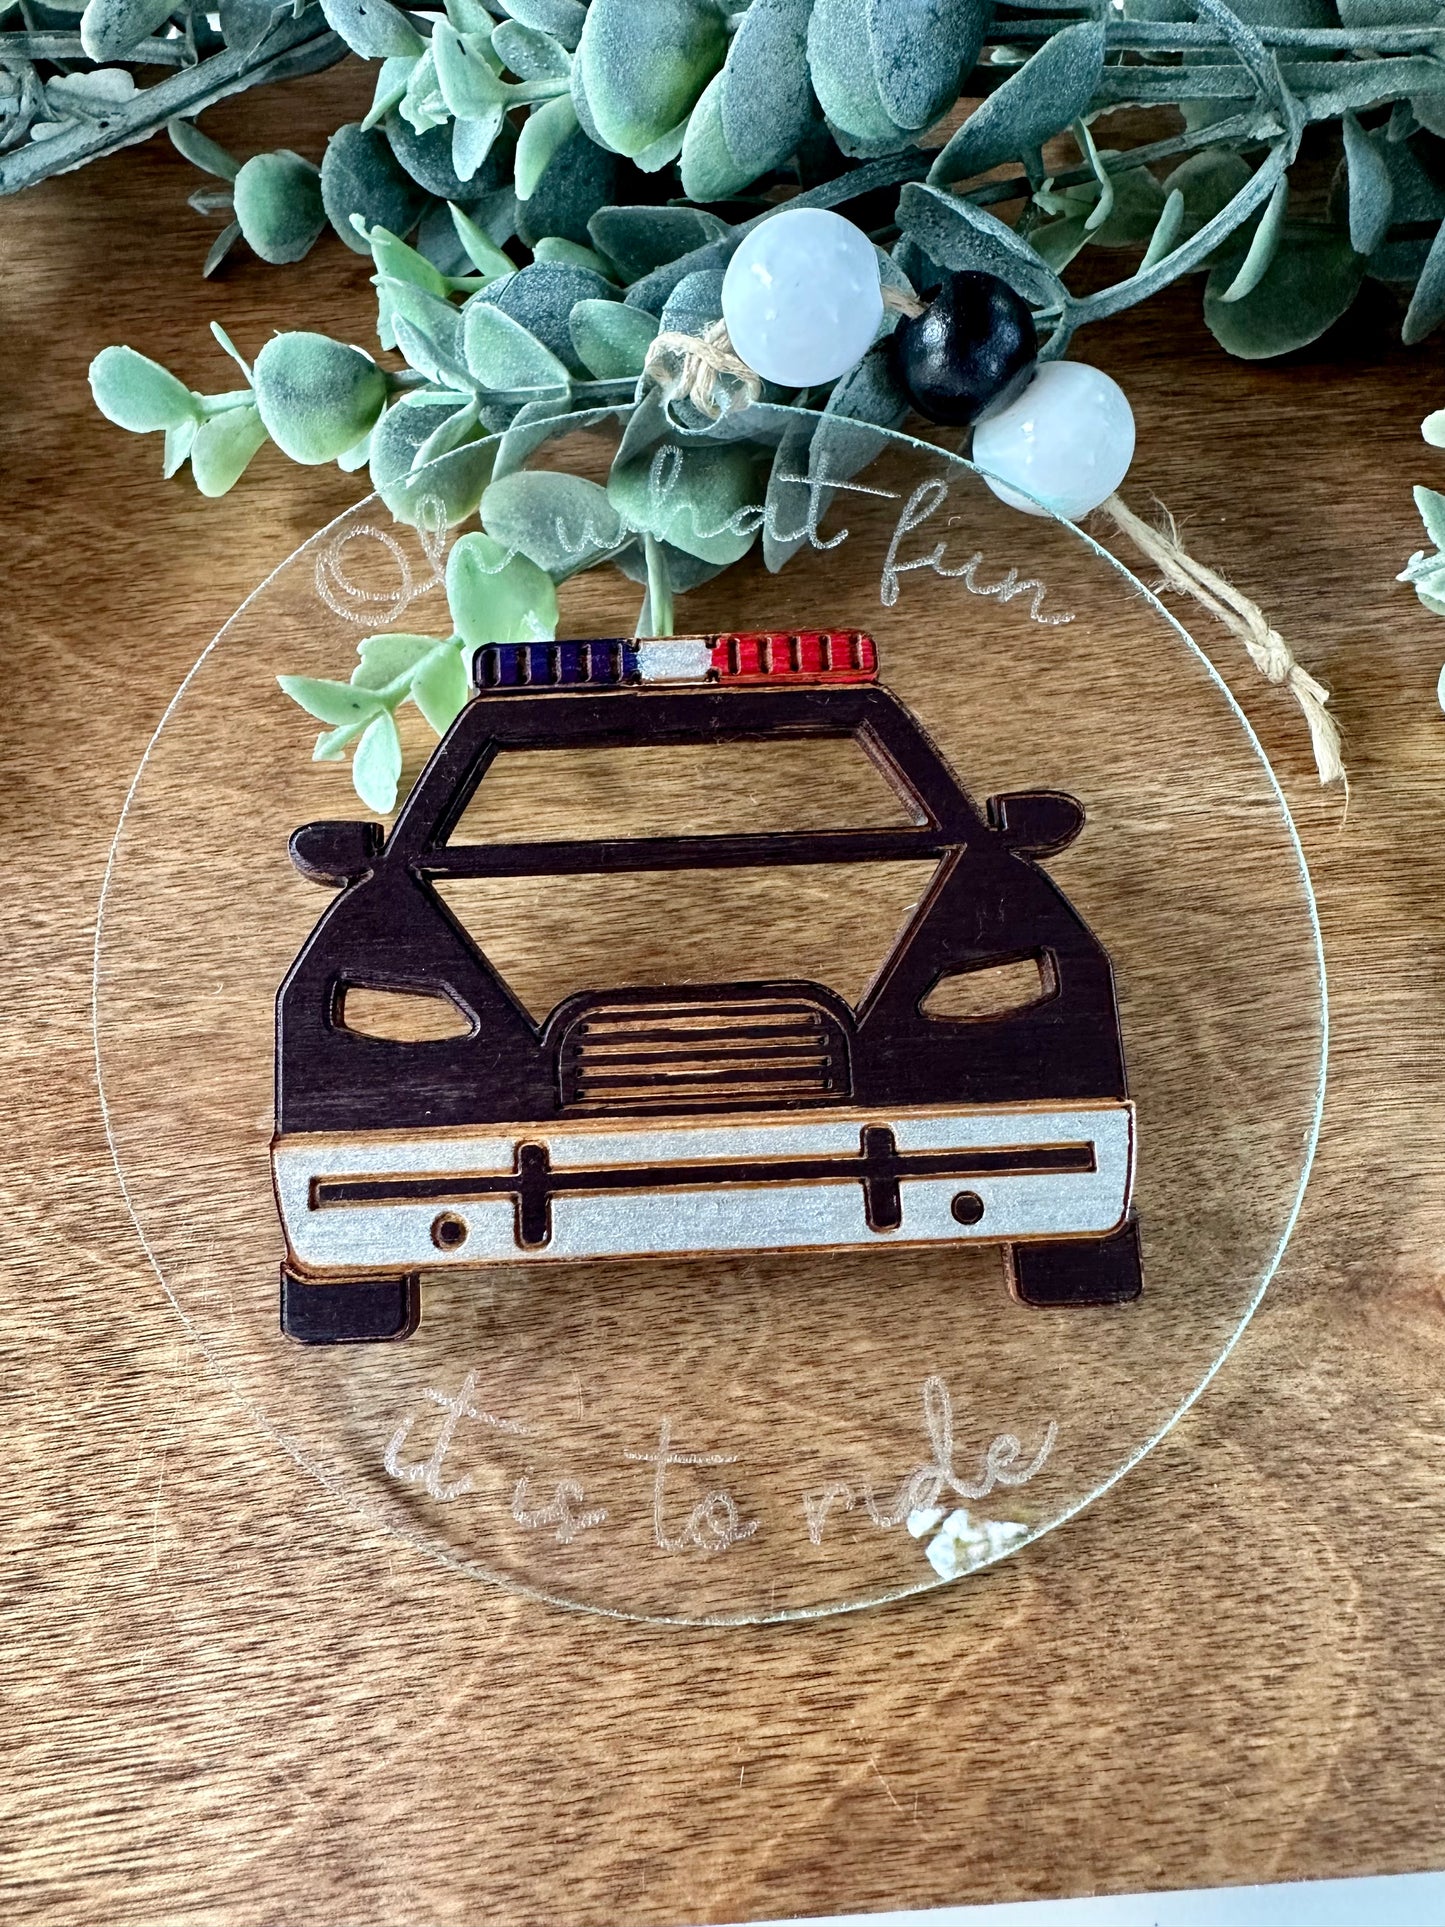 "Oh! What Fun" Vehicle Ornament